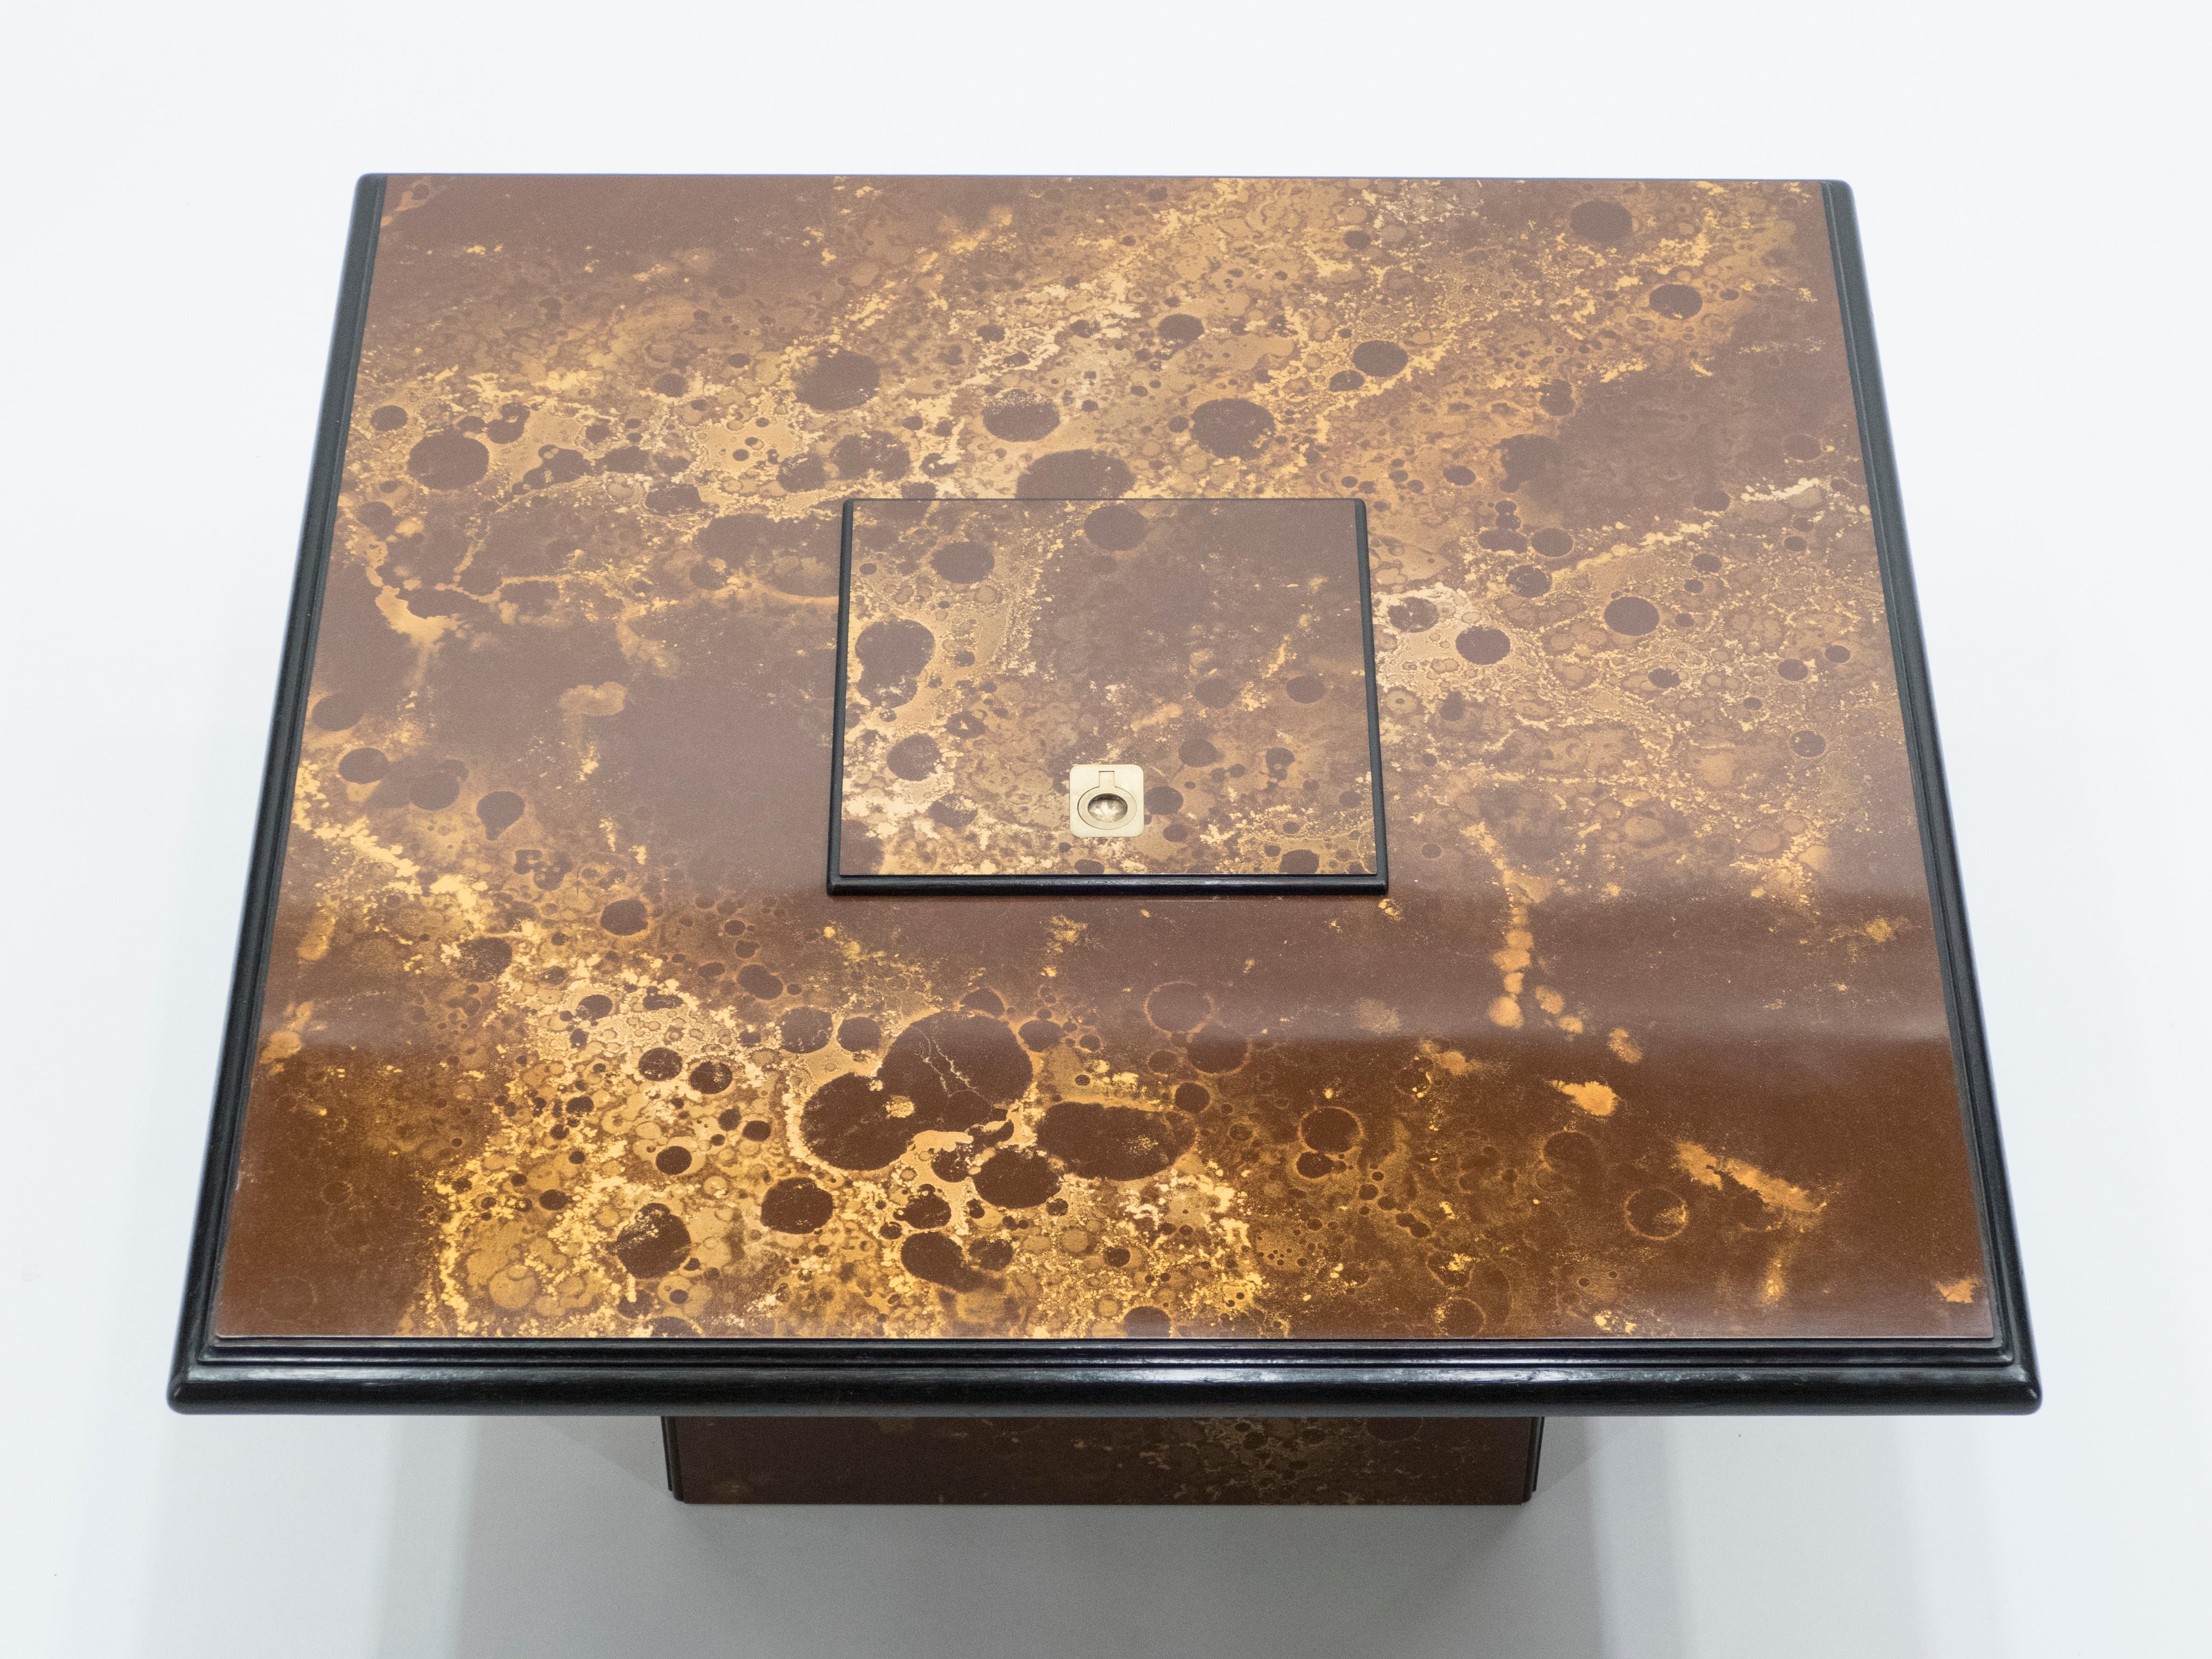 An exciting example of French design firm Maison Jansen’s commissioned pieces. This bar coffee table is made from solid mahogany, lacquered in a rich dark brown and bronze, golden finish. The resulting effect is a beautiful mottling of color around